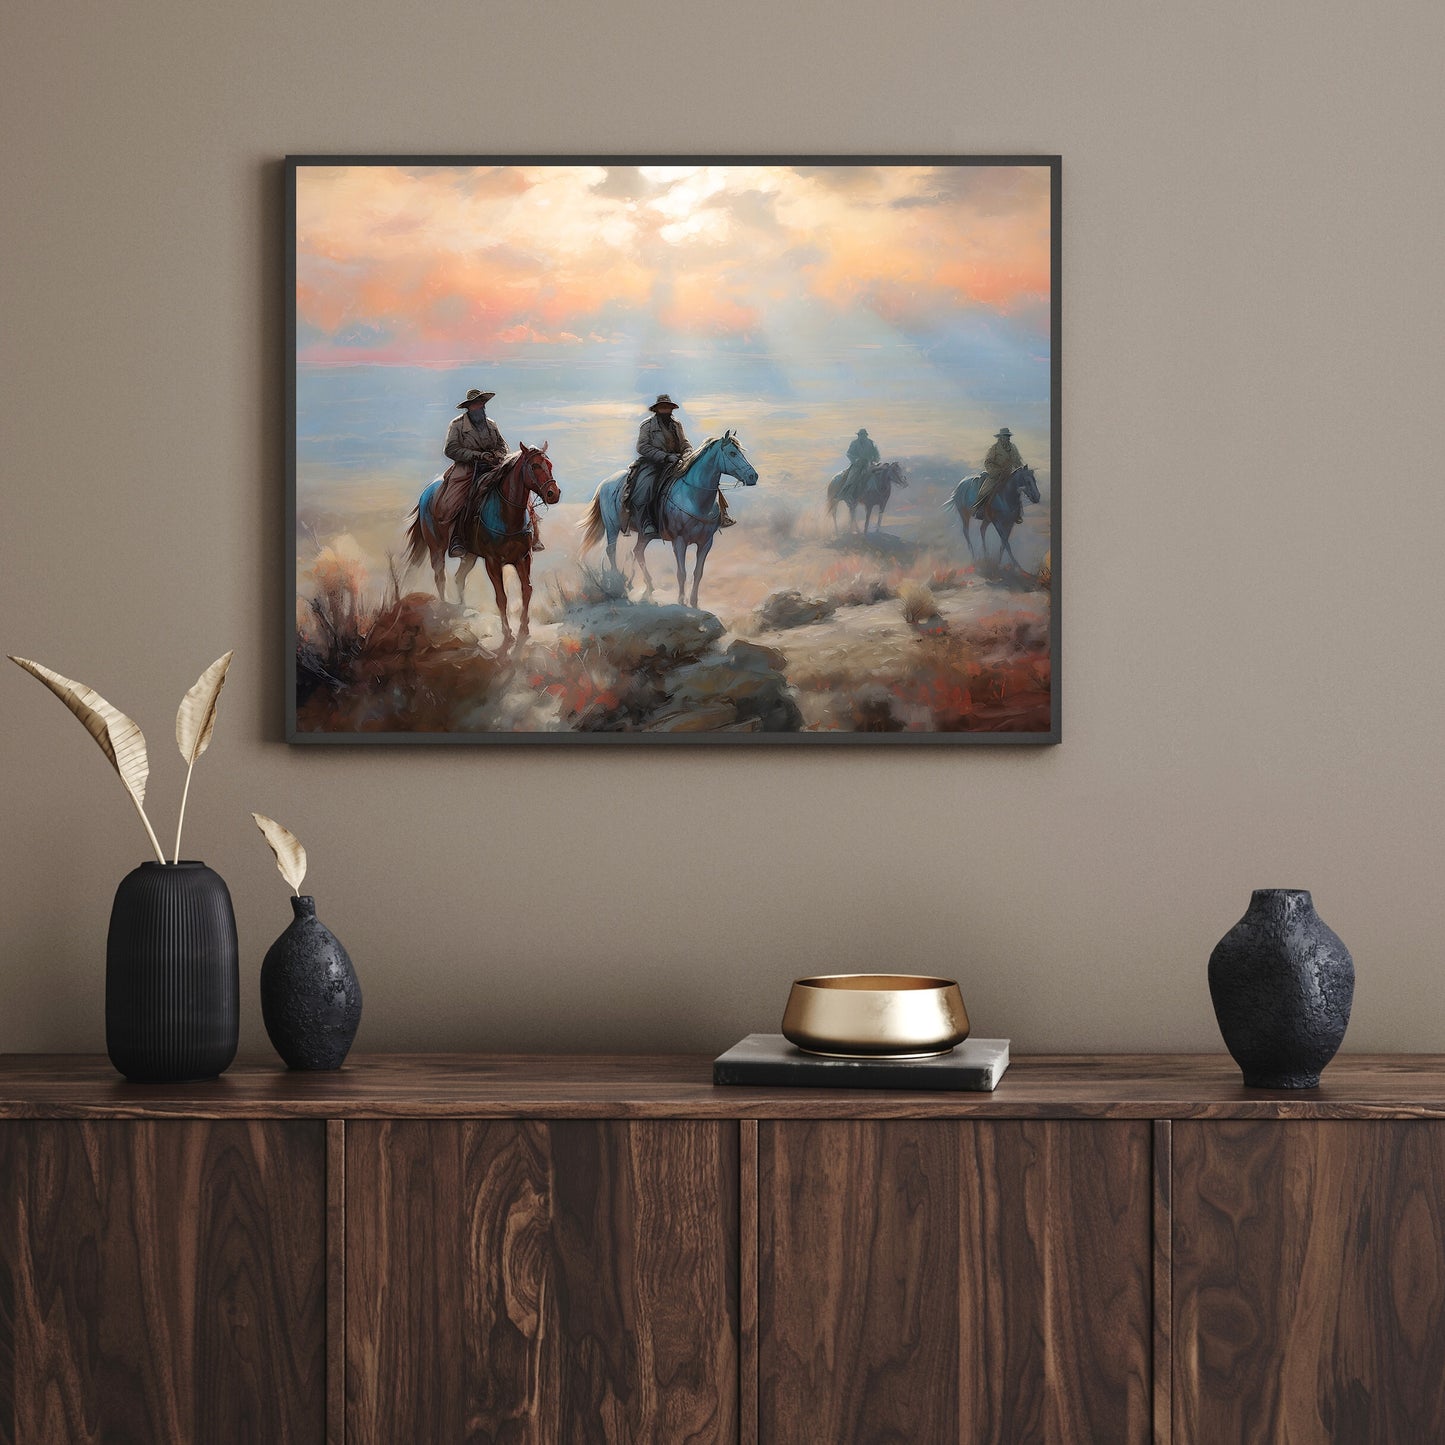 Vintage Wild West Paper Poster Prints Wall Art Four Outlaws Riding Horses in Californian Desert Sunset, Soft Pale Colors, Wild West Art, Cowboys